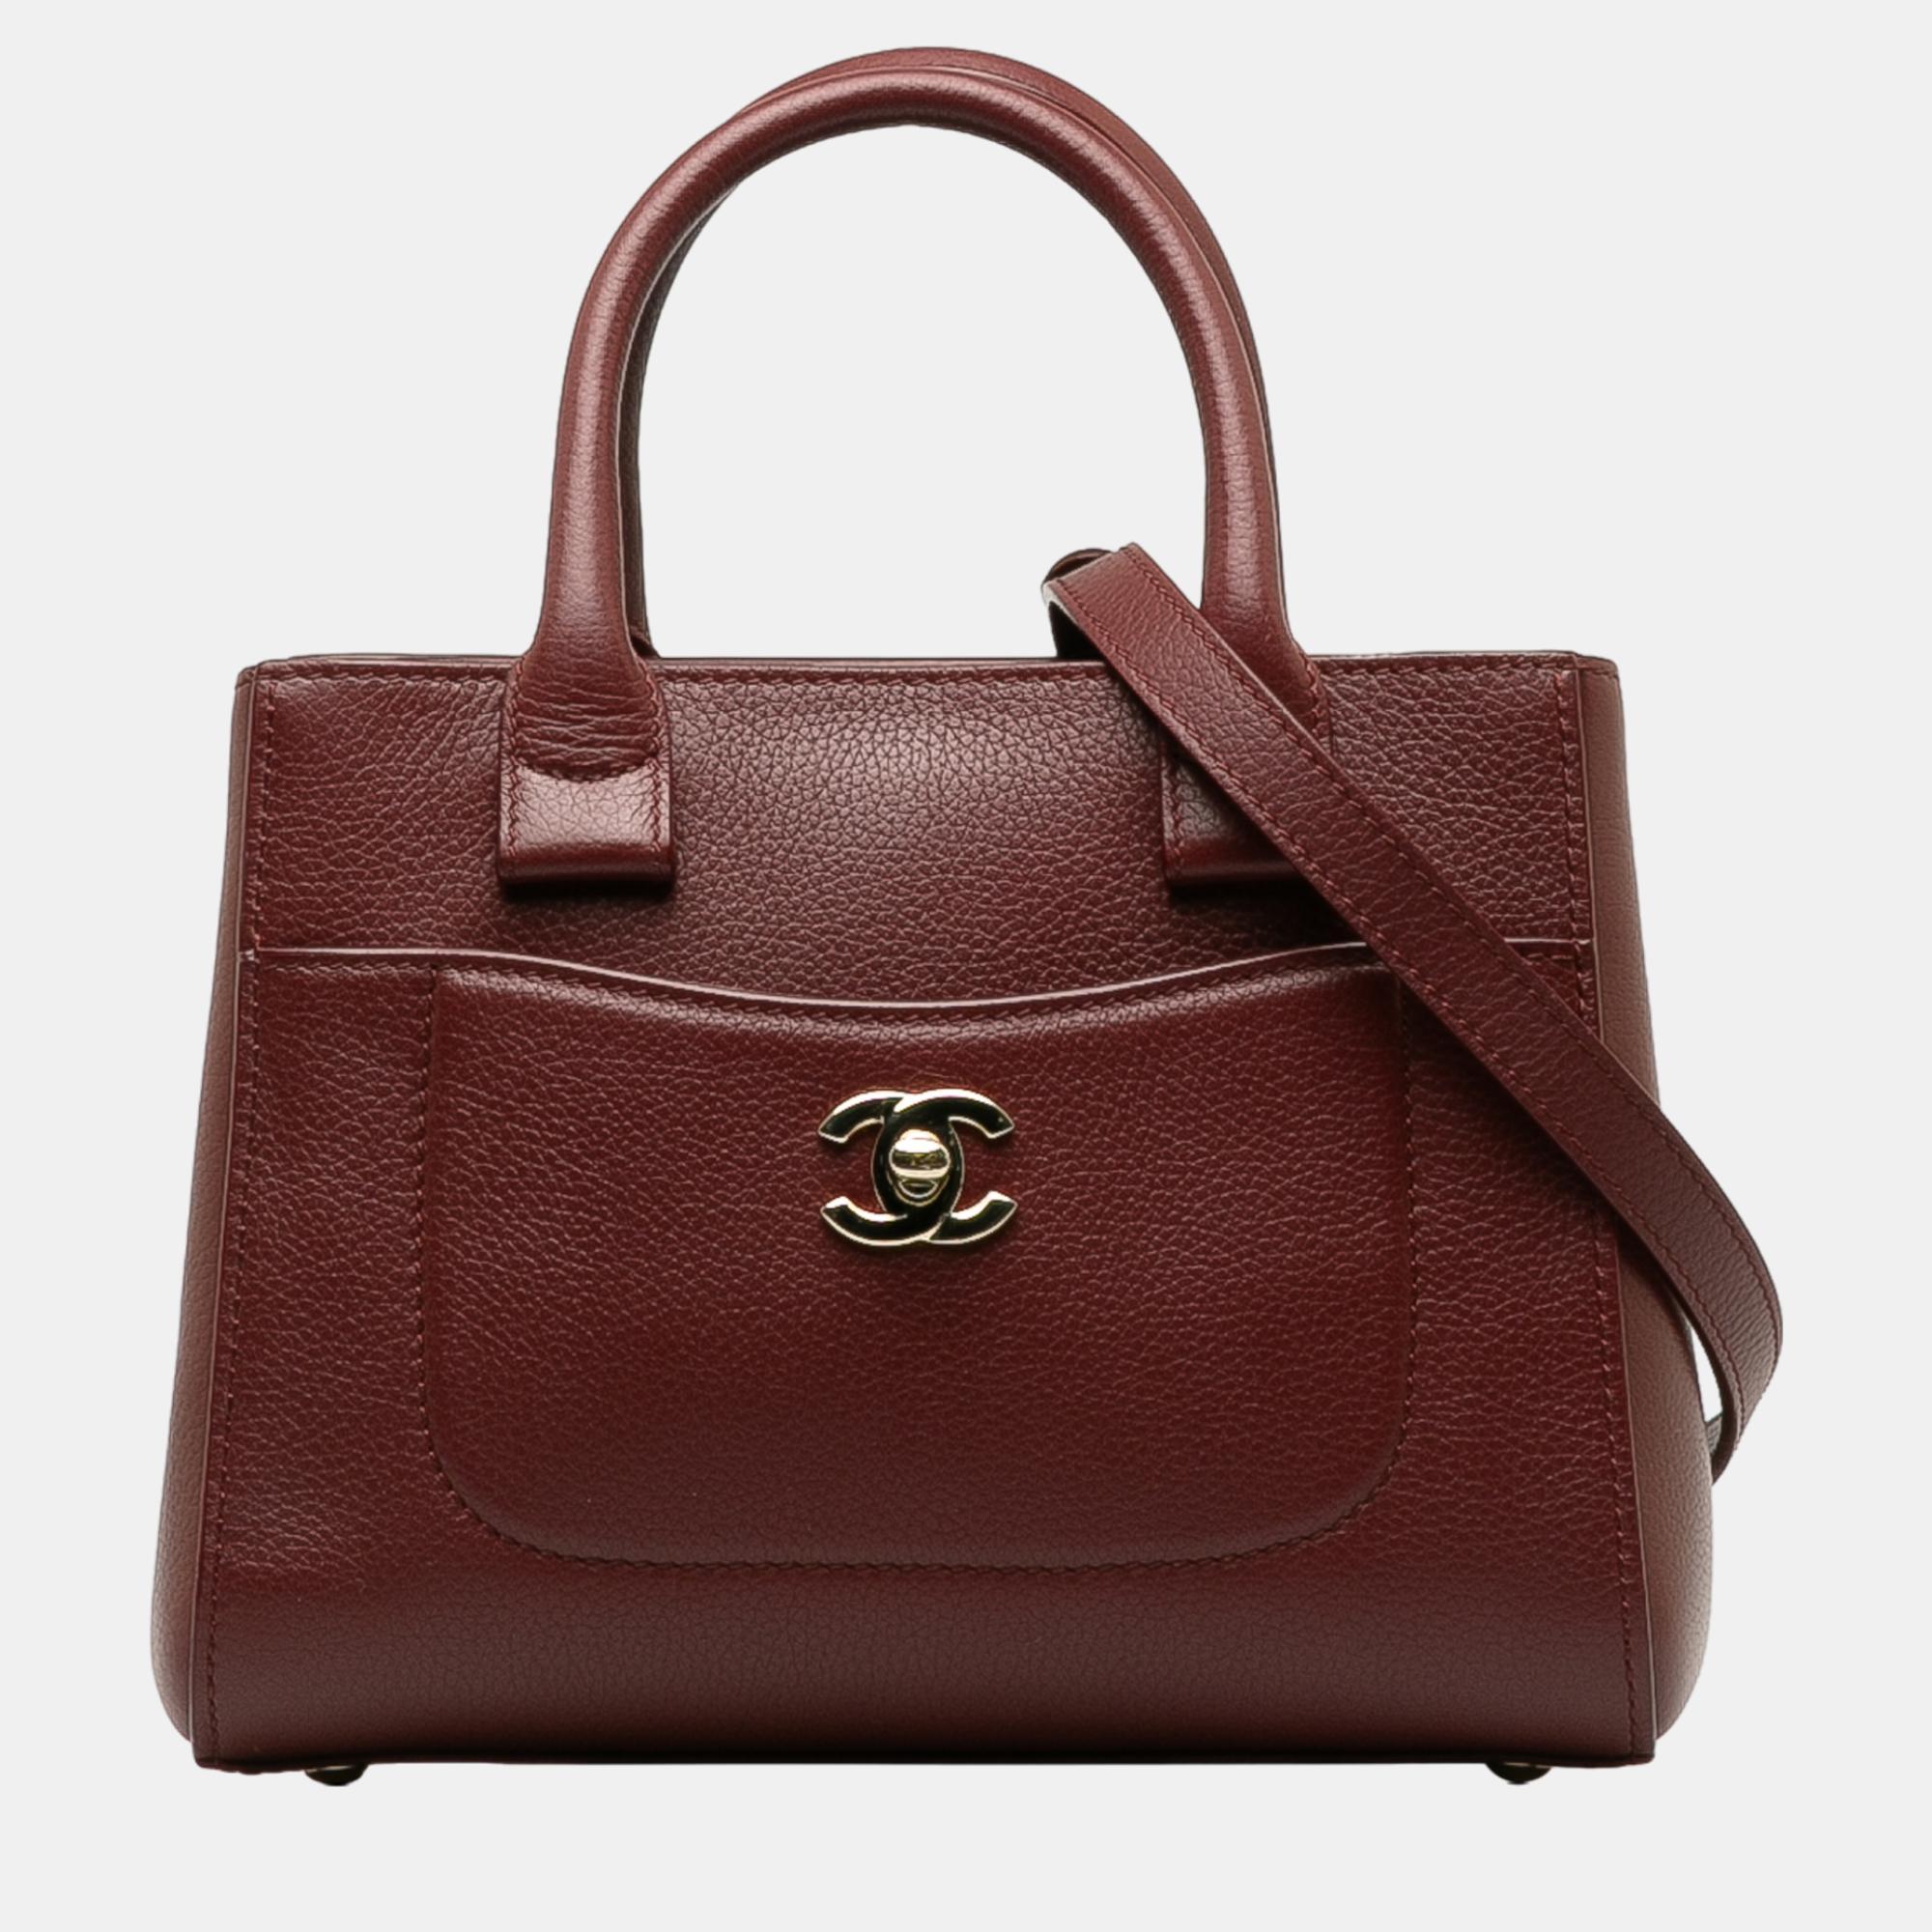 Pre-owned Chanel Burgundy Mini Neo Executive Satchel